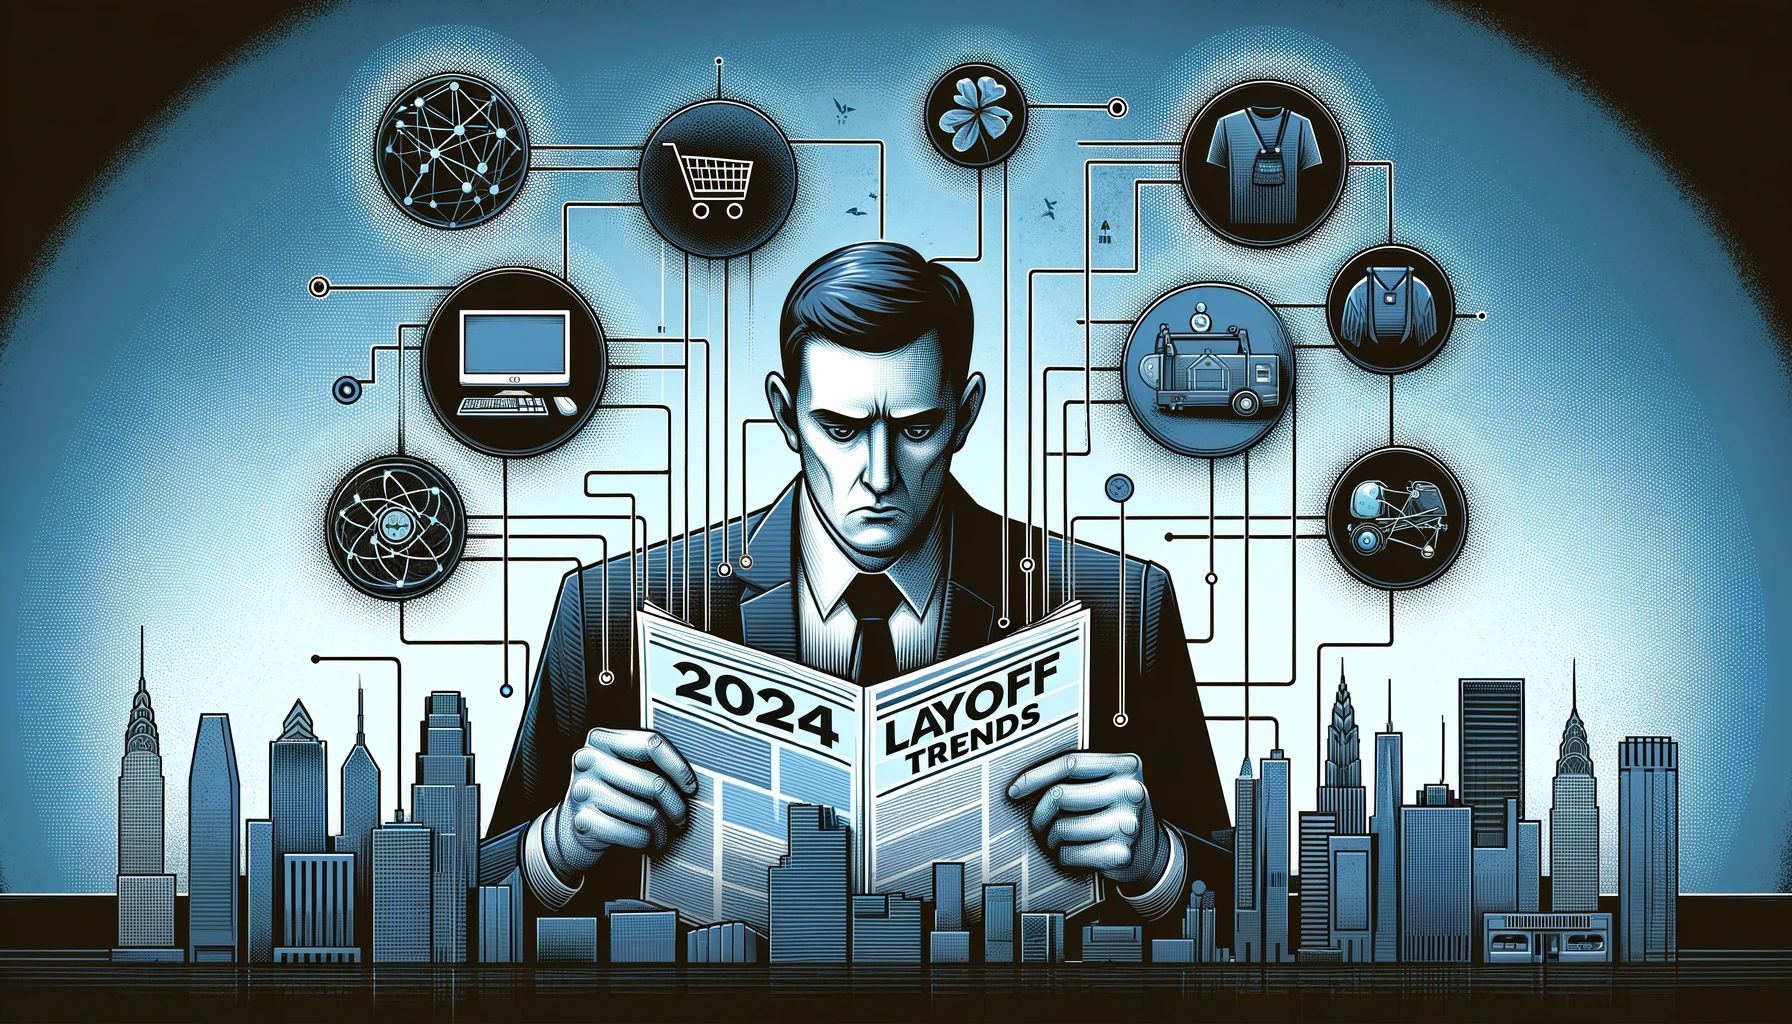 An illustrative montage showing 2024 layoff trends with icons of a computer, shopping cart, and electric vehicle linked to a business executive reading a newspaper in a cityscape setting.